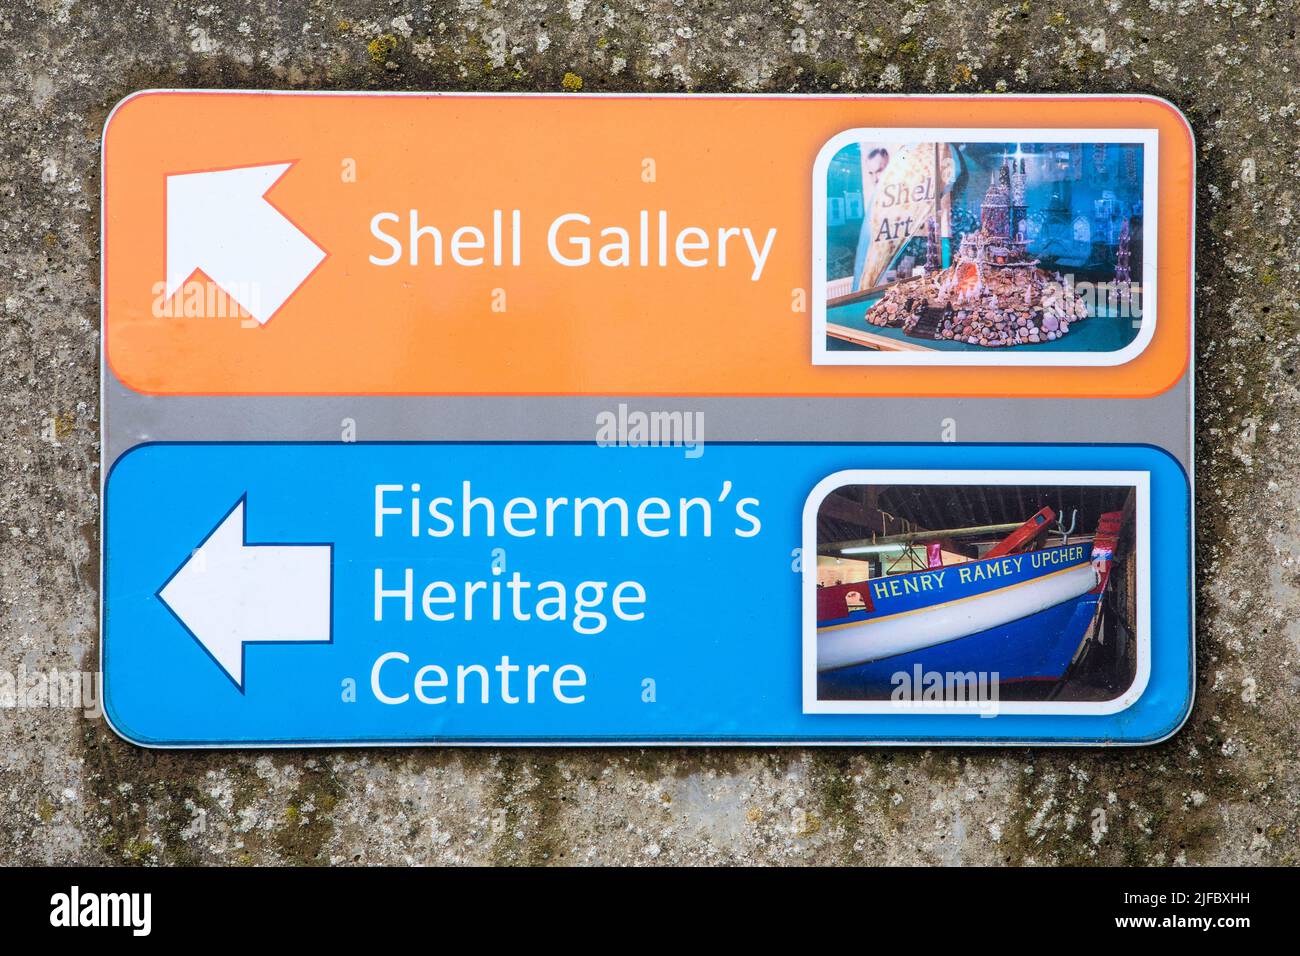 Norfolk, UK - May 16th 2022: Direction signs shoing local tourist attractions- the Shell Gallery and the Fishermens Heritage Centre in the town of She Stock Photo